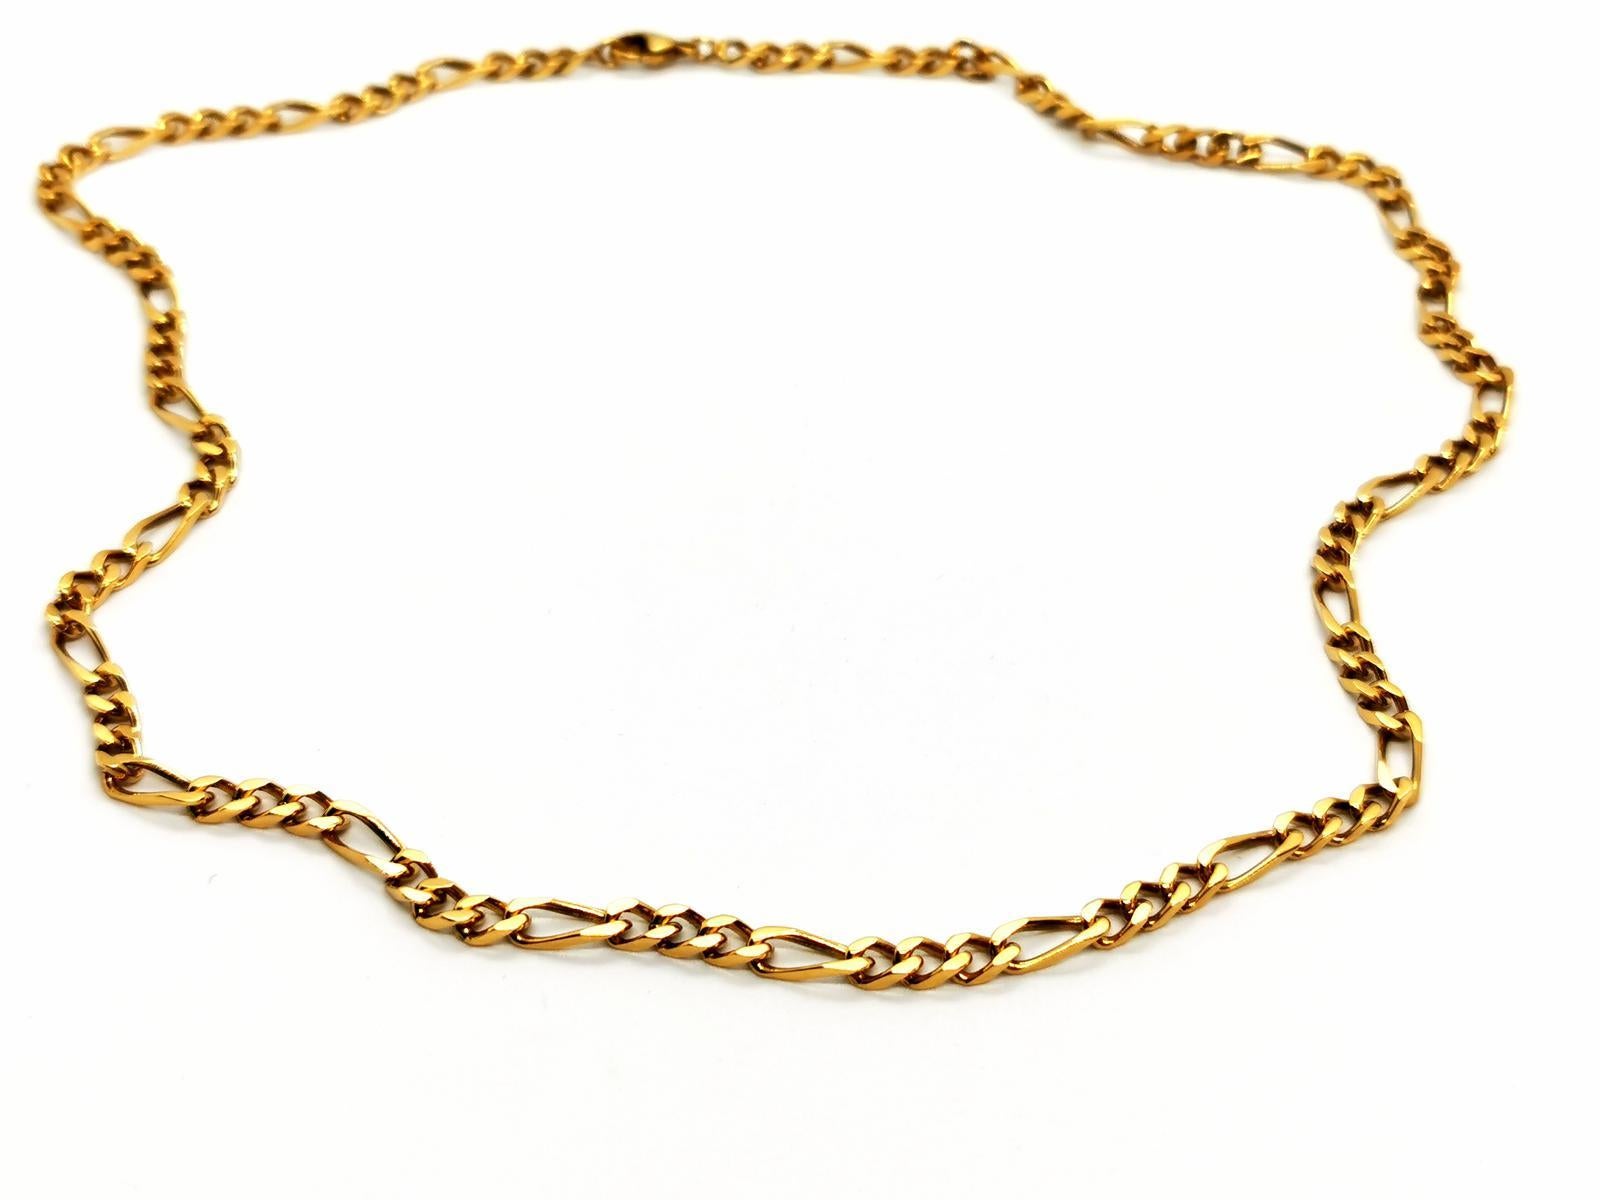 Necklace chain. in yellow gold 750 thousandths (18 carats). figaro mesh. length: 52 cm. width: 0.37 cm. total weight: 26.57g. eagle head punch. excellent condition.
